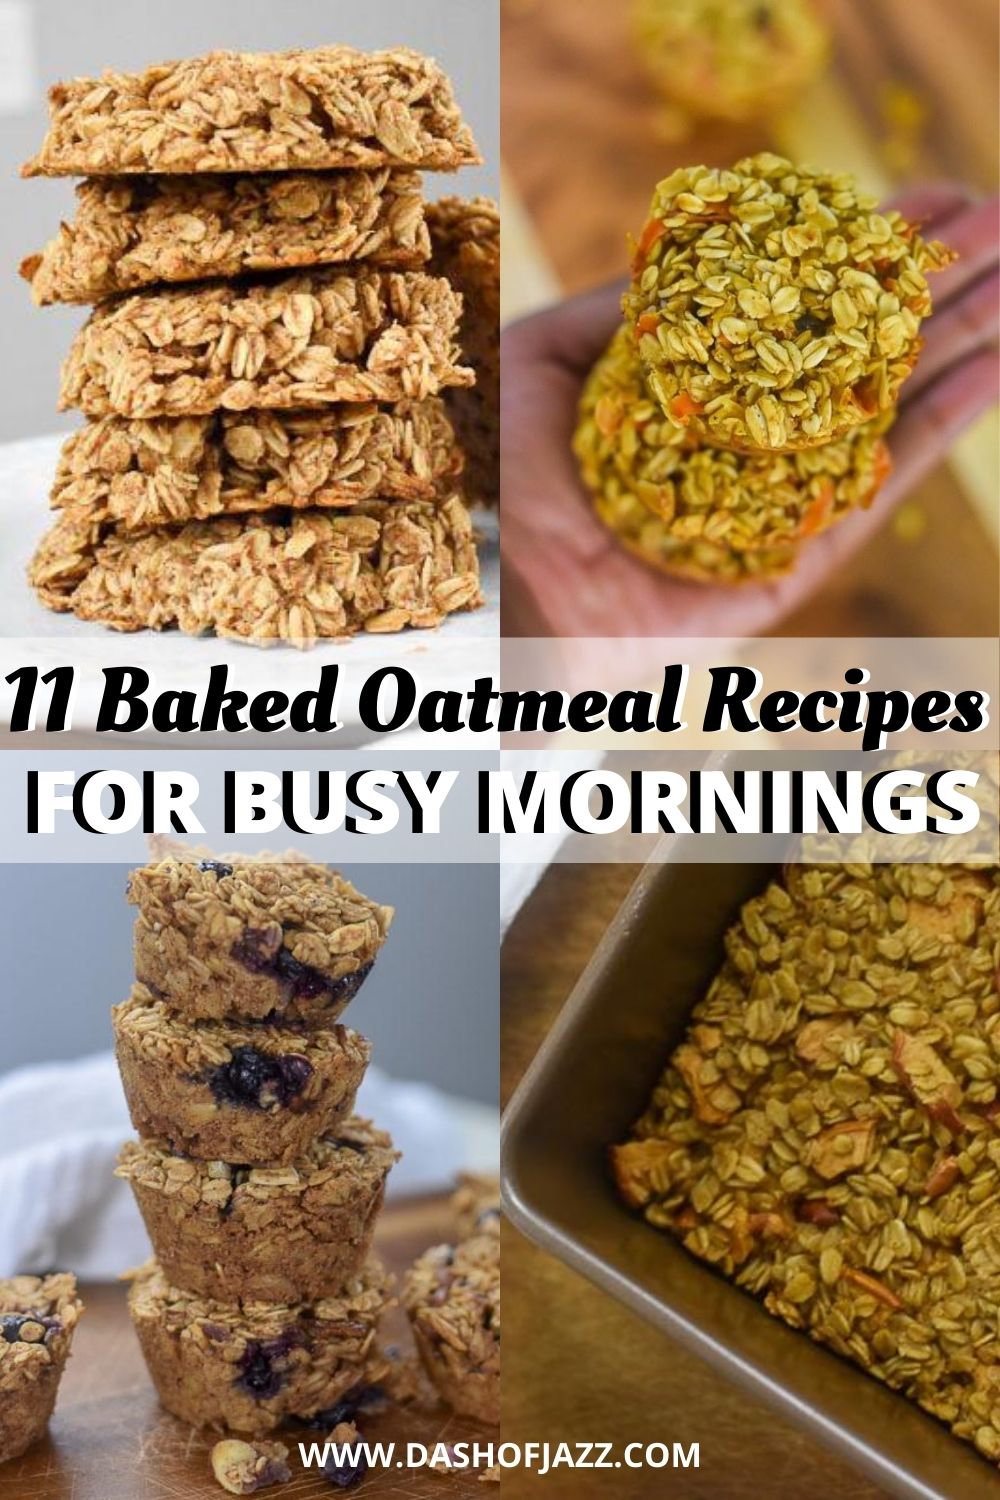 collage of baked oatmeal photos with text overlay "11 baked oatmeal recipes for busy mornings"